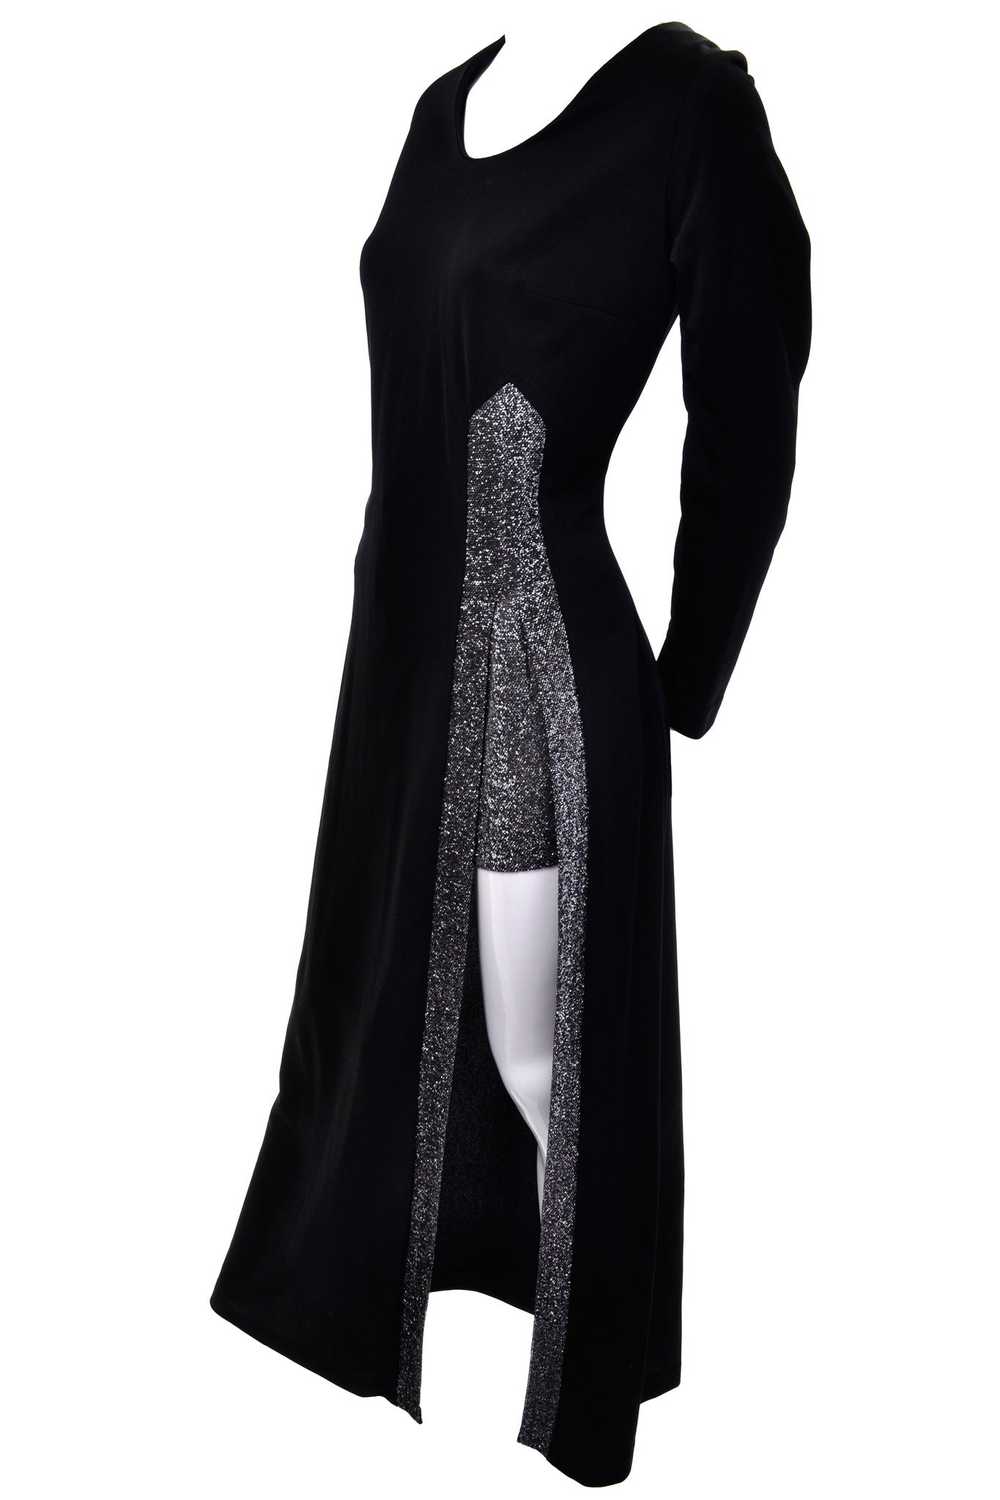 1970's Disco Vintage Black Dress with Slit and Si… - image 2